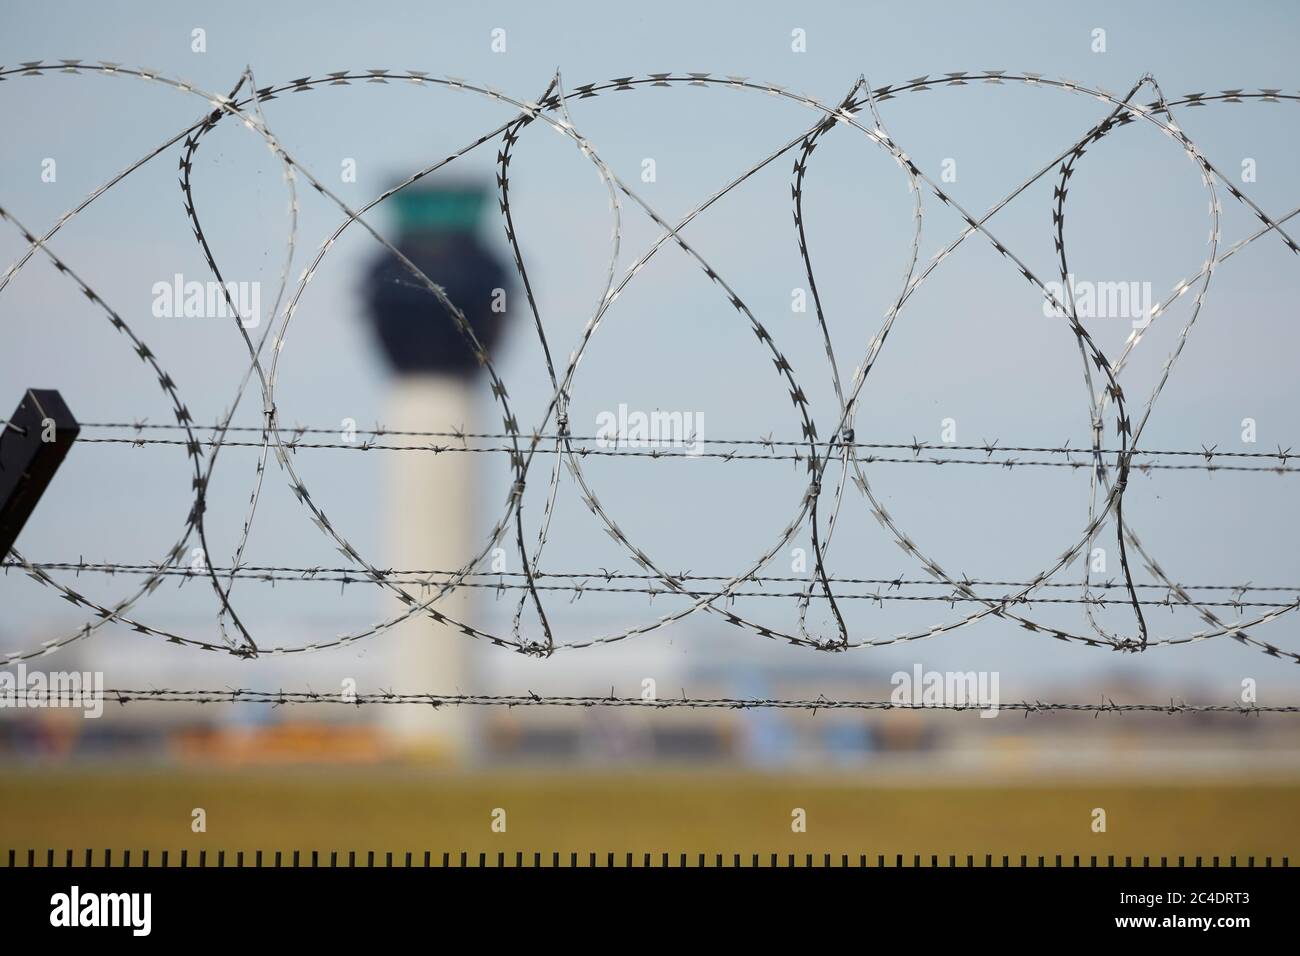 Manchester Airport air traffic control tower through barbed wire of the perimeter fence Stock Photo